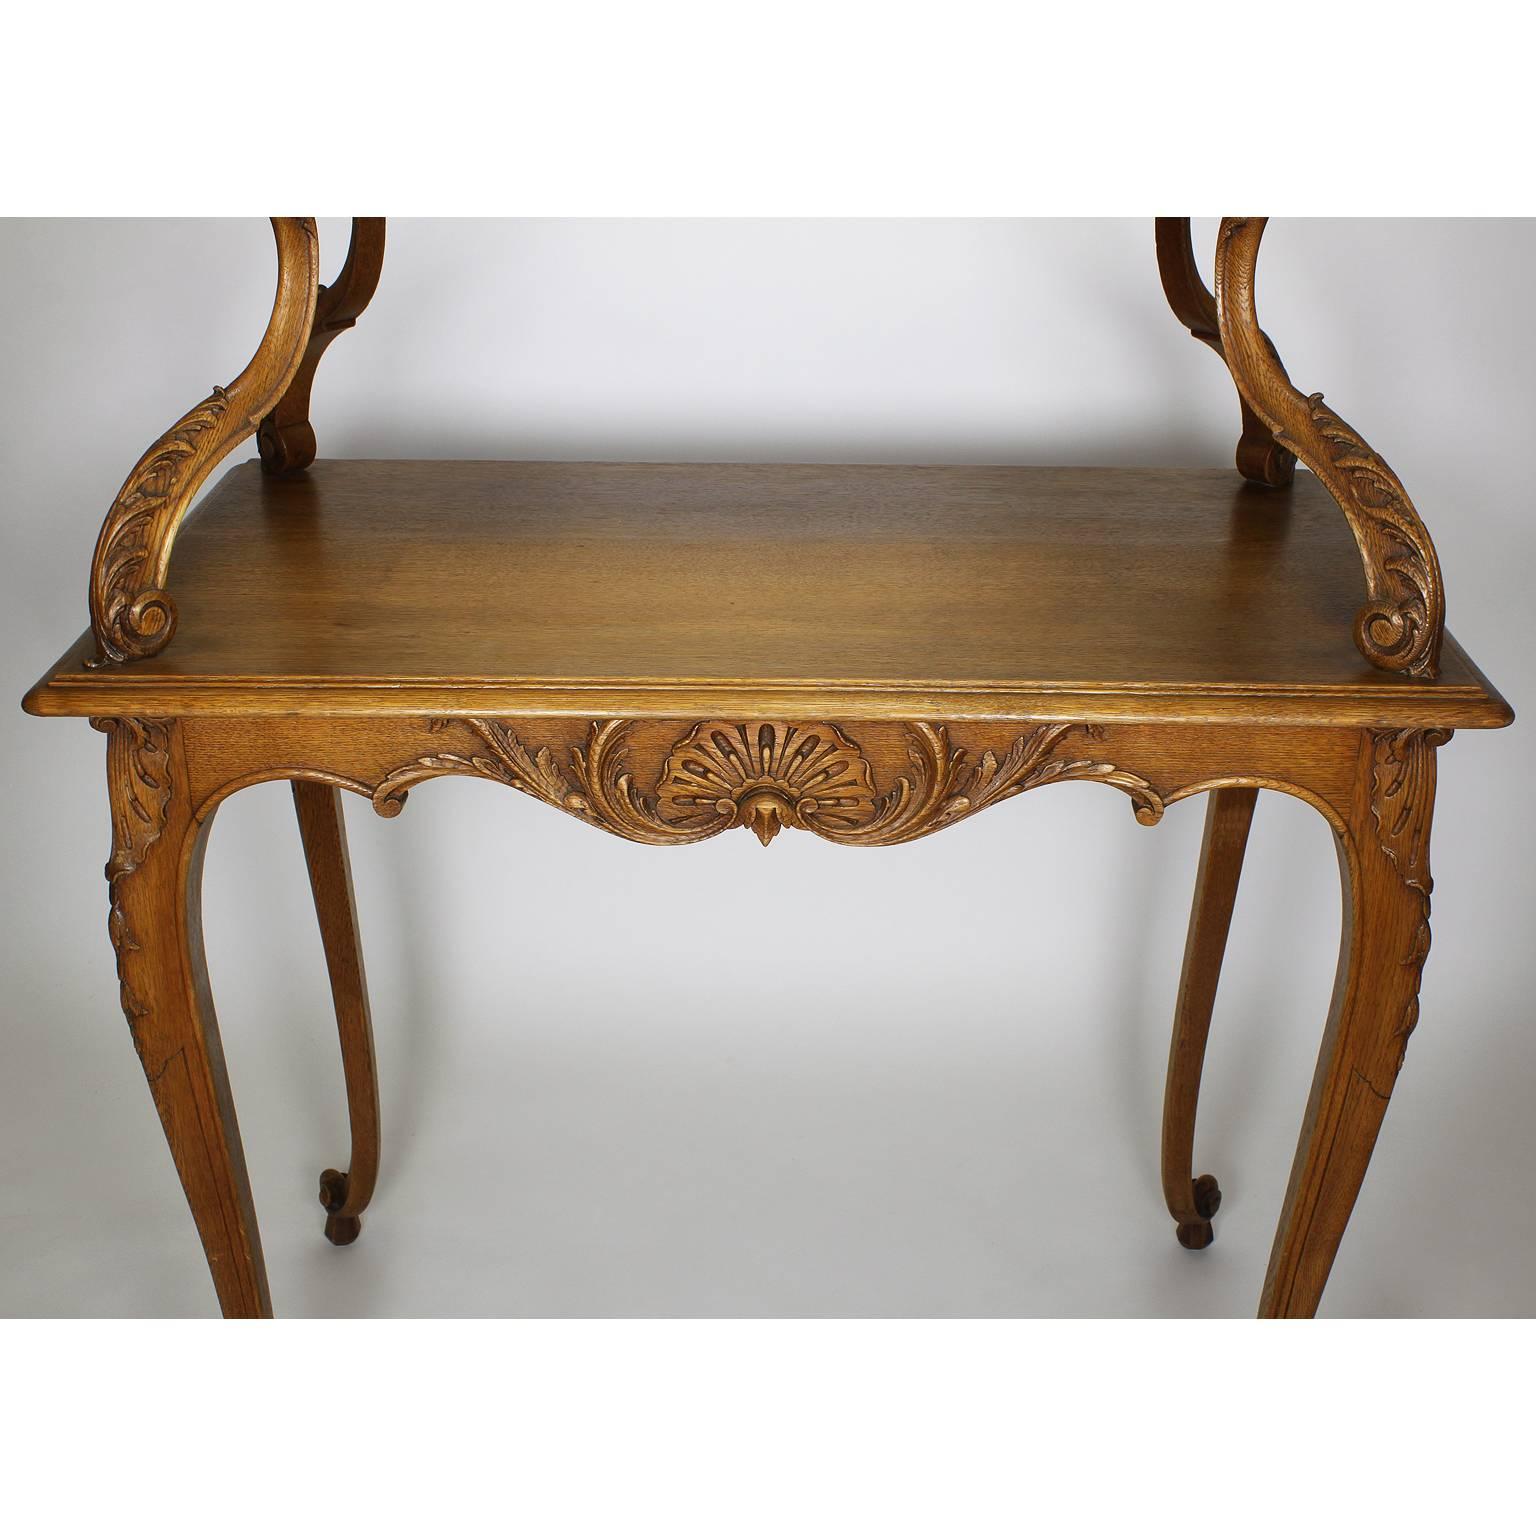 Hand-Carved French 19th-20th Century Louis XV Style Carved Oak Two-Tier Tea or Dessert Table For Sale